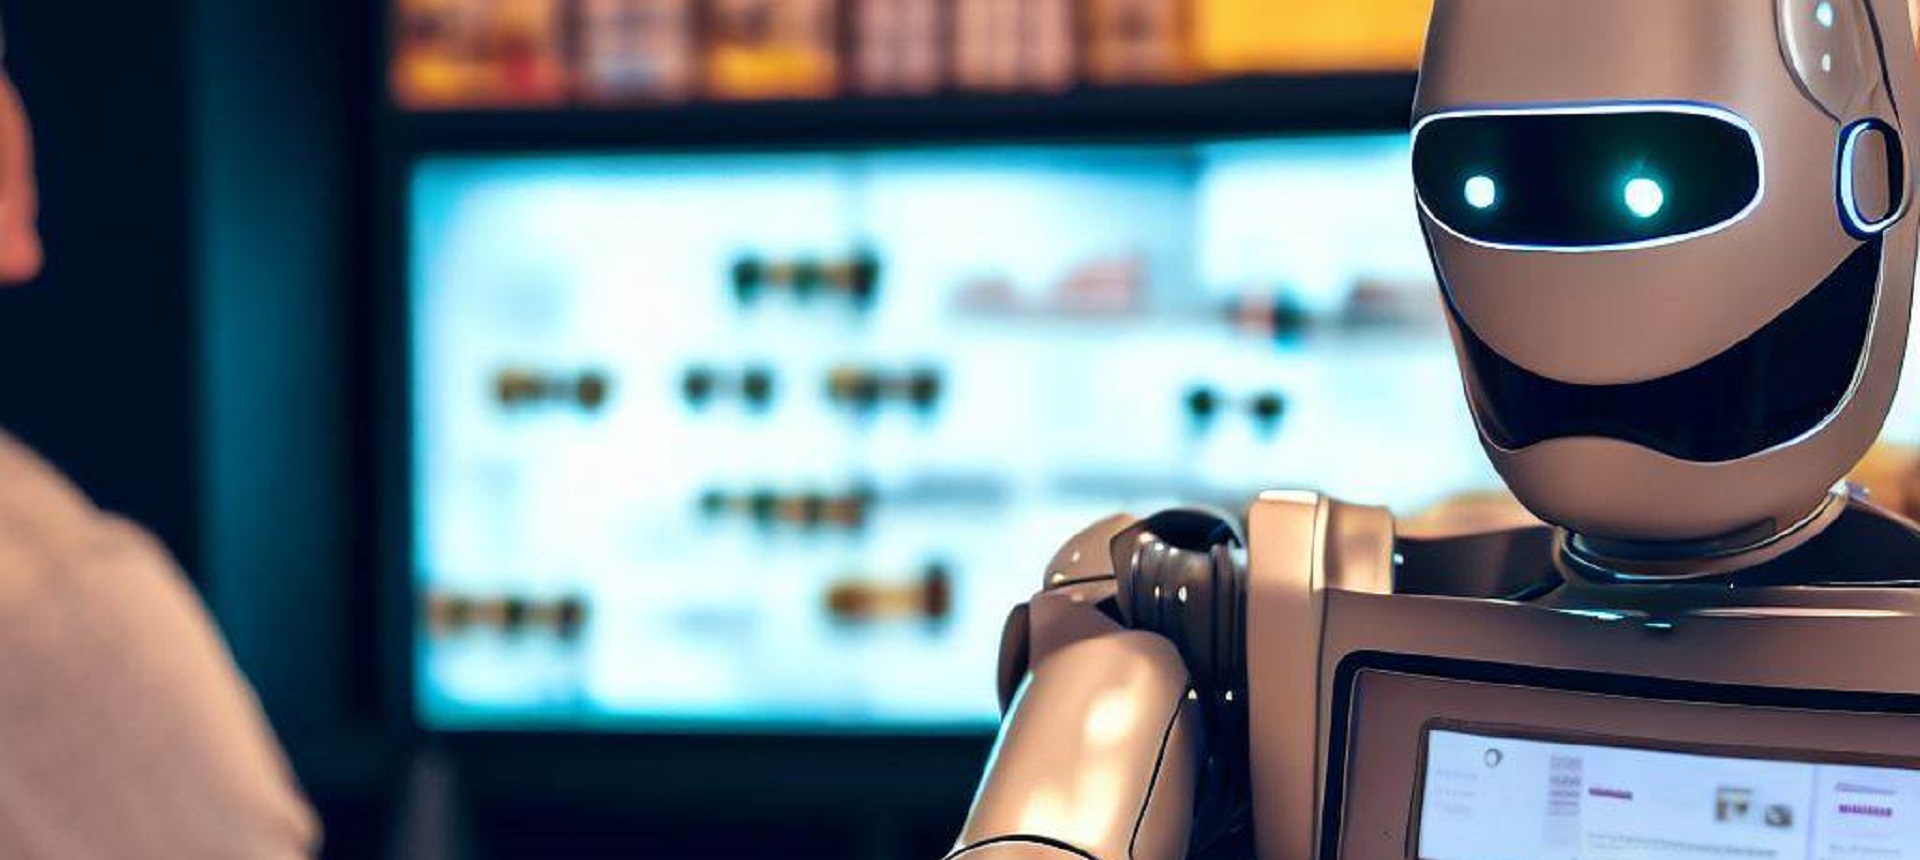 Image of a robot behind a shop counter assisting a customer, created by Microsoft Bing Image Creator AI tool